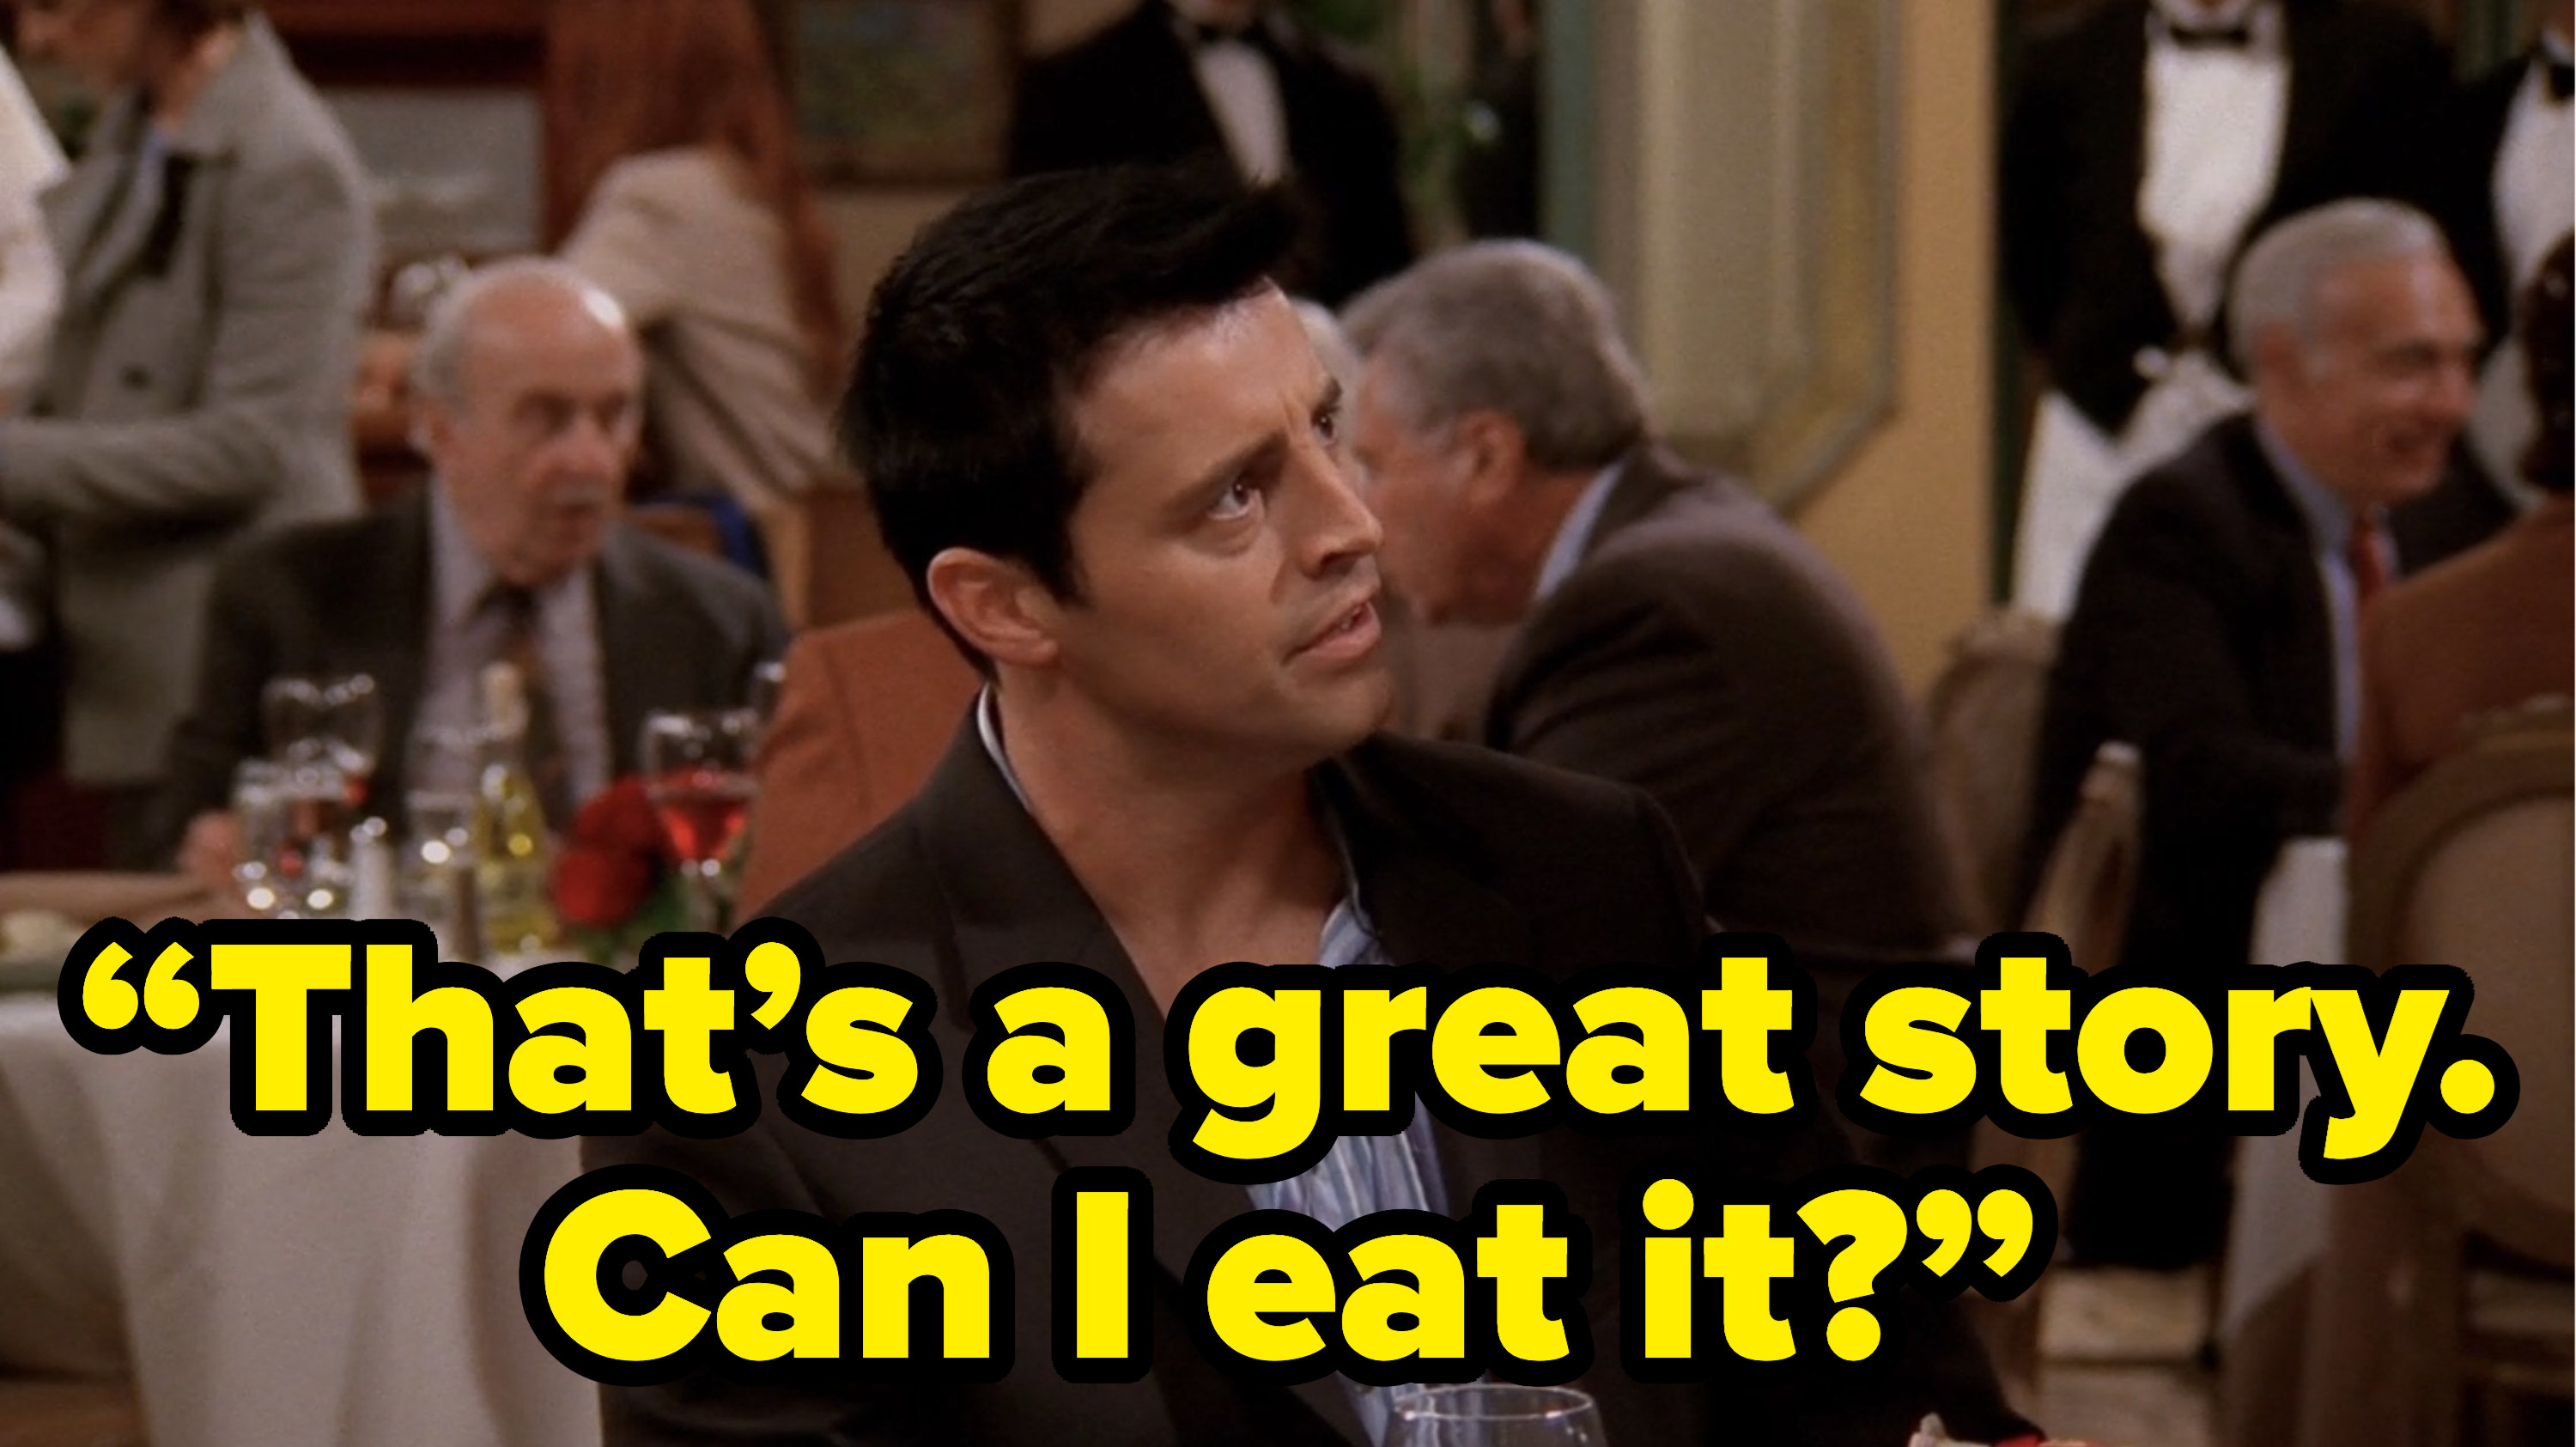 joey saying “That’s a great story. Can I eat it?” on friends